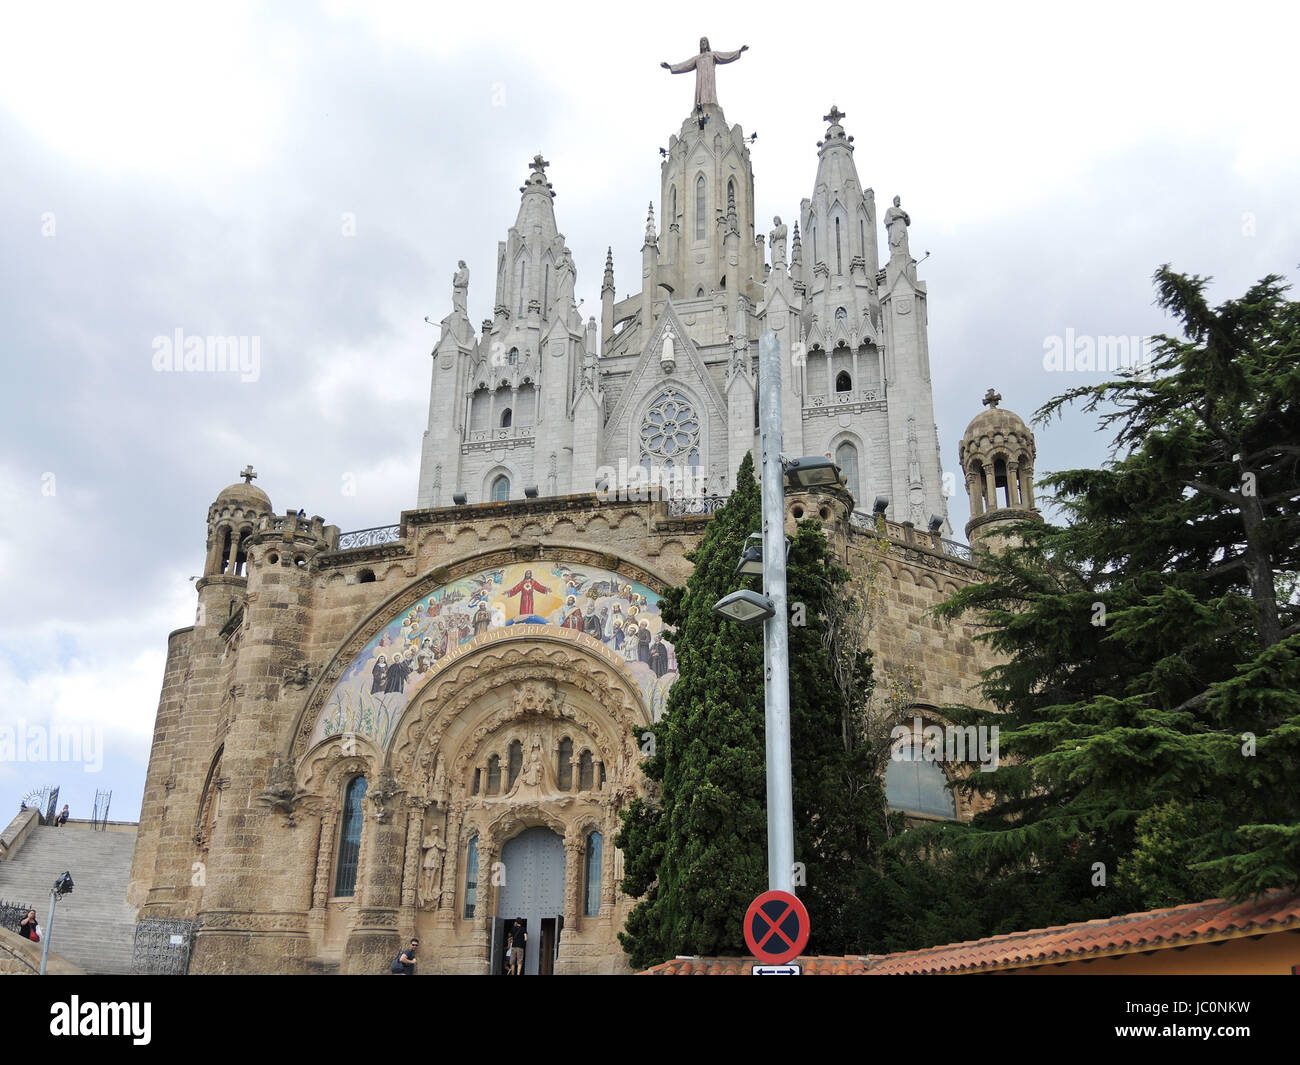 BARCELONA, SPAIN - AUGUST 14, 2013: entrance in Expiatory Church of the Sacred Heart of Jesus, Barcelona, Spain. The building is the work of the Spanish Catalan architect Enric Sagnier. Stock Photo